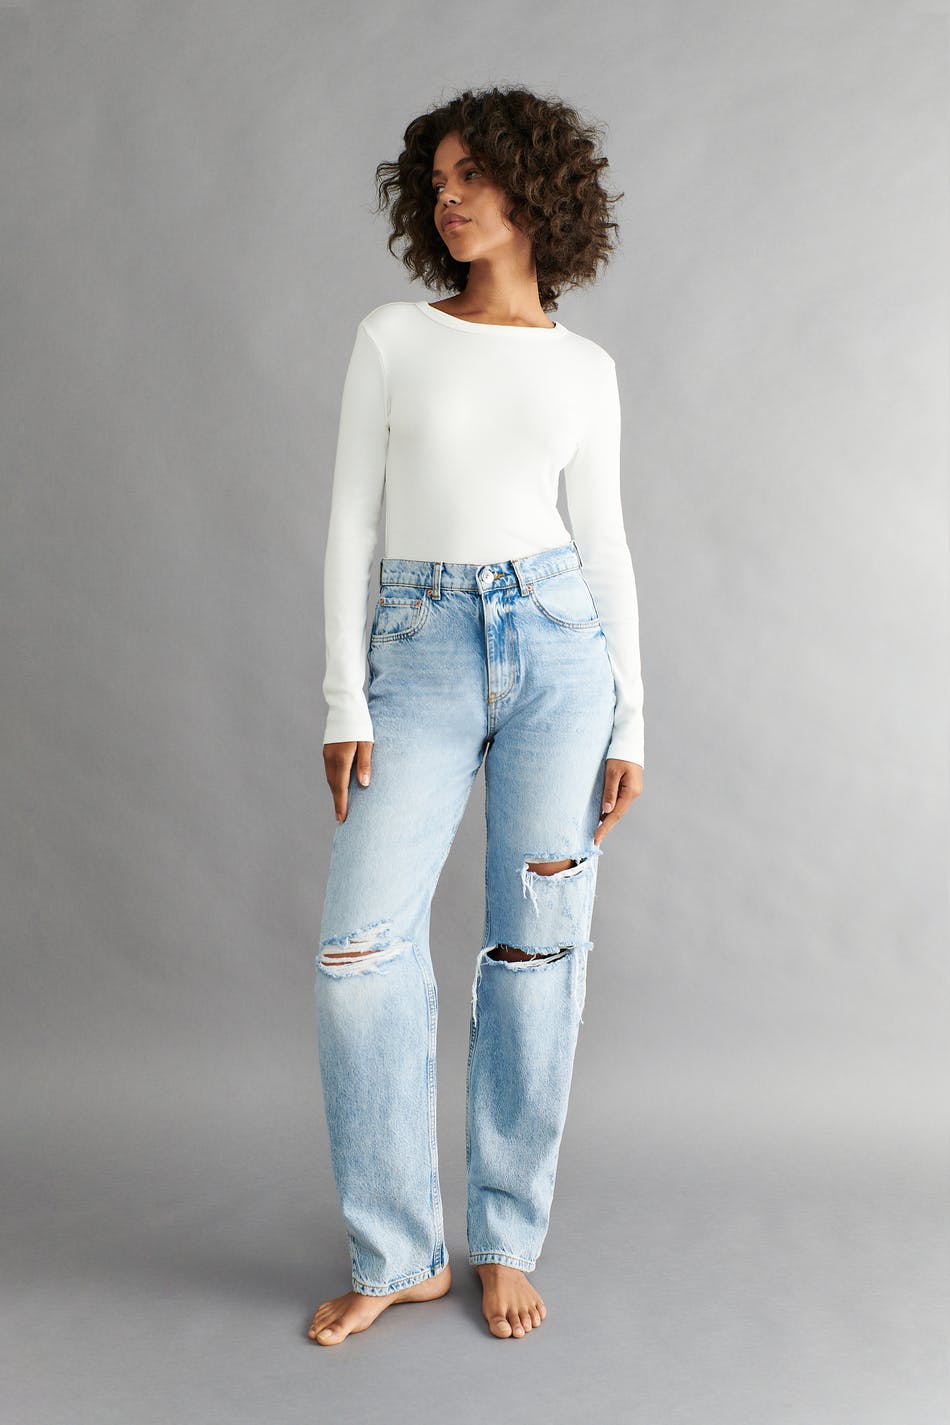 Udlevering Alabama fritid 90s high waist jeans - Gina Tricot